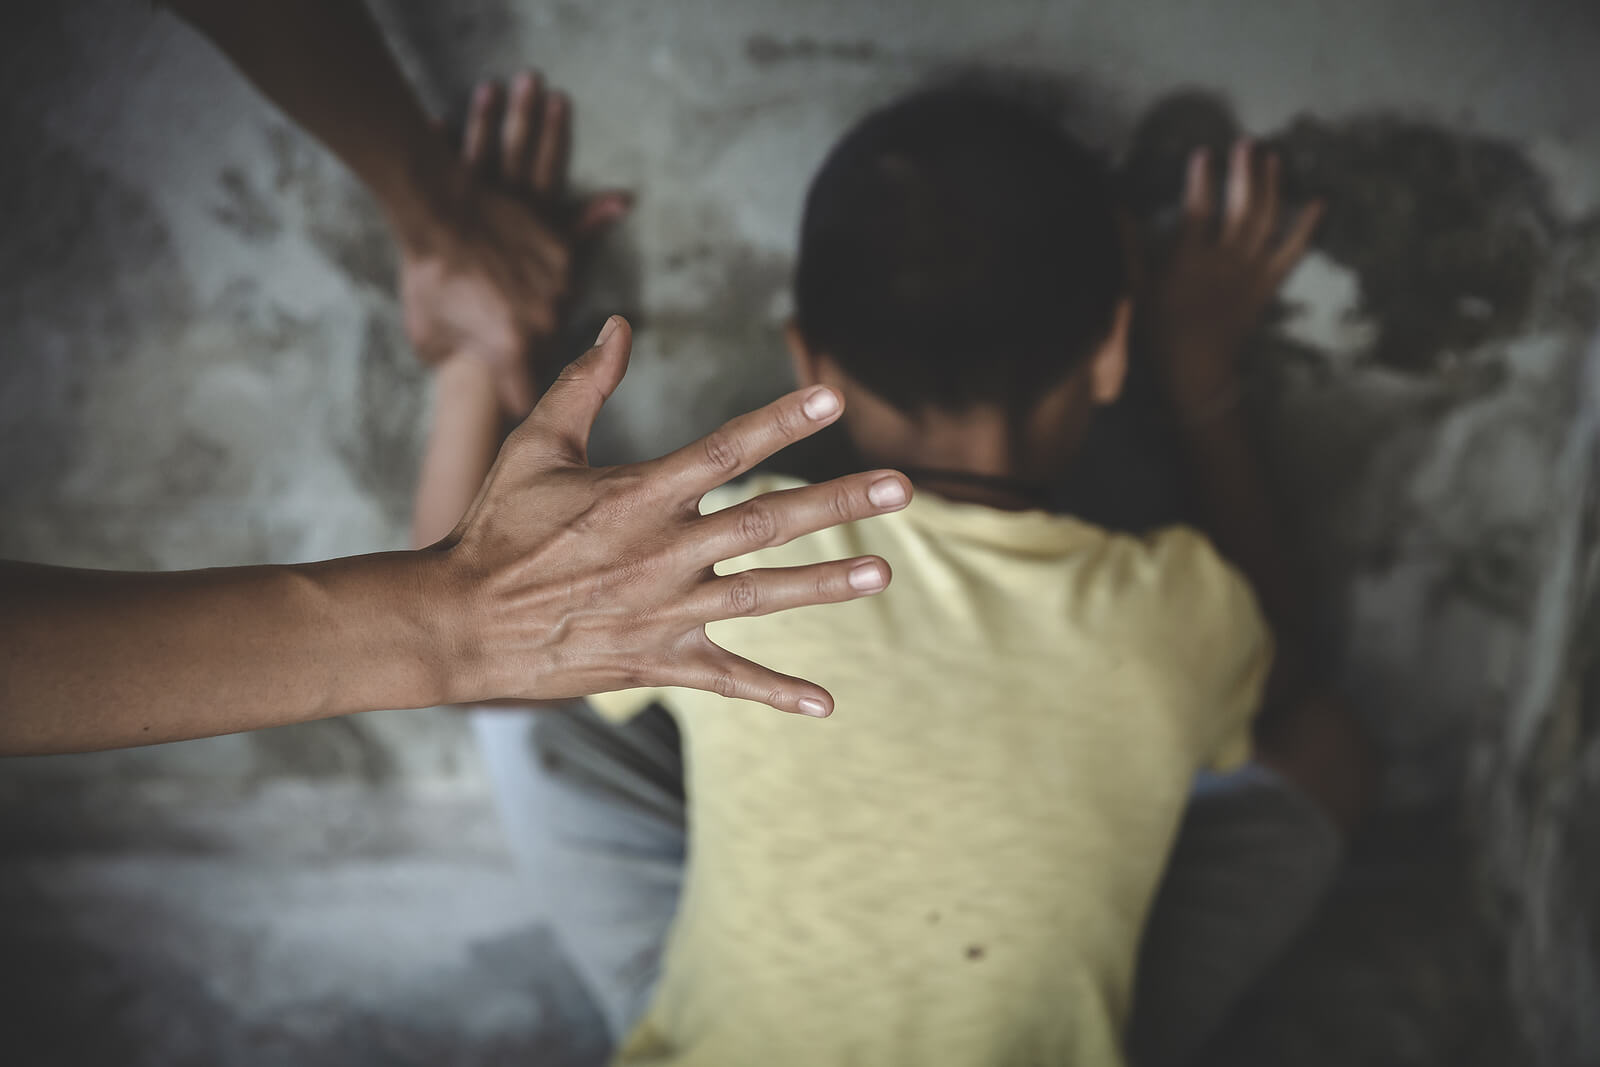 A woman's hand preparing to hit a child who's crouched down on the floor.